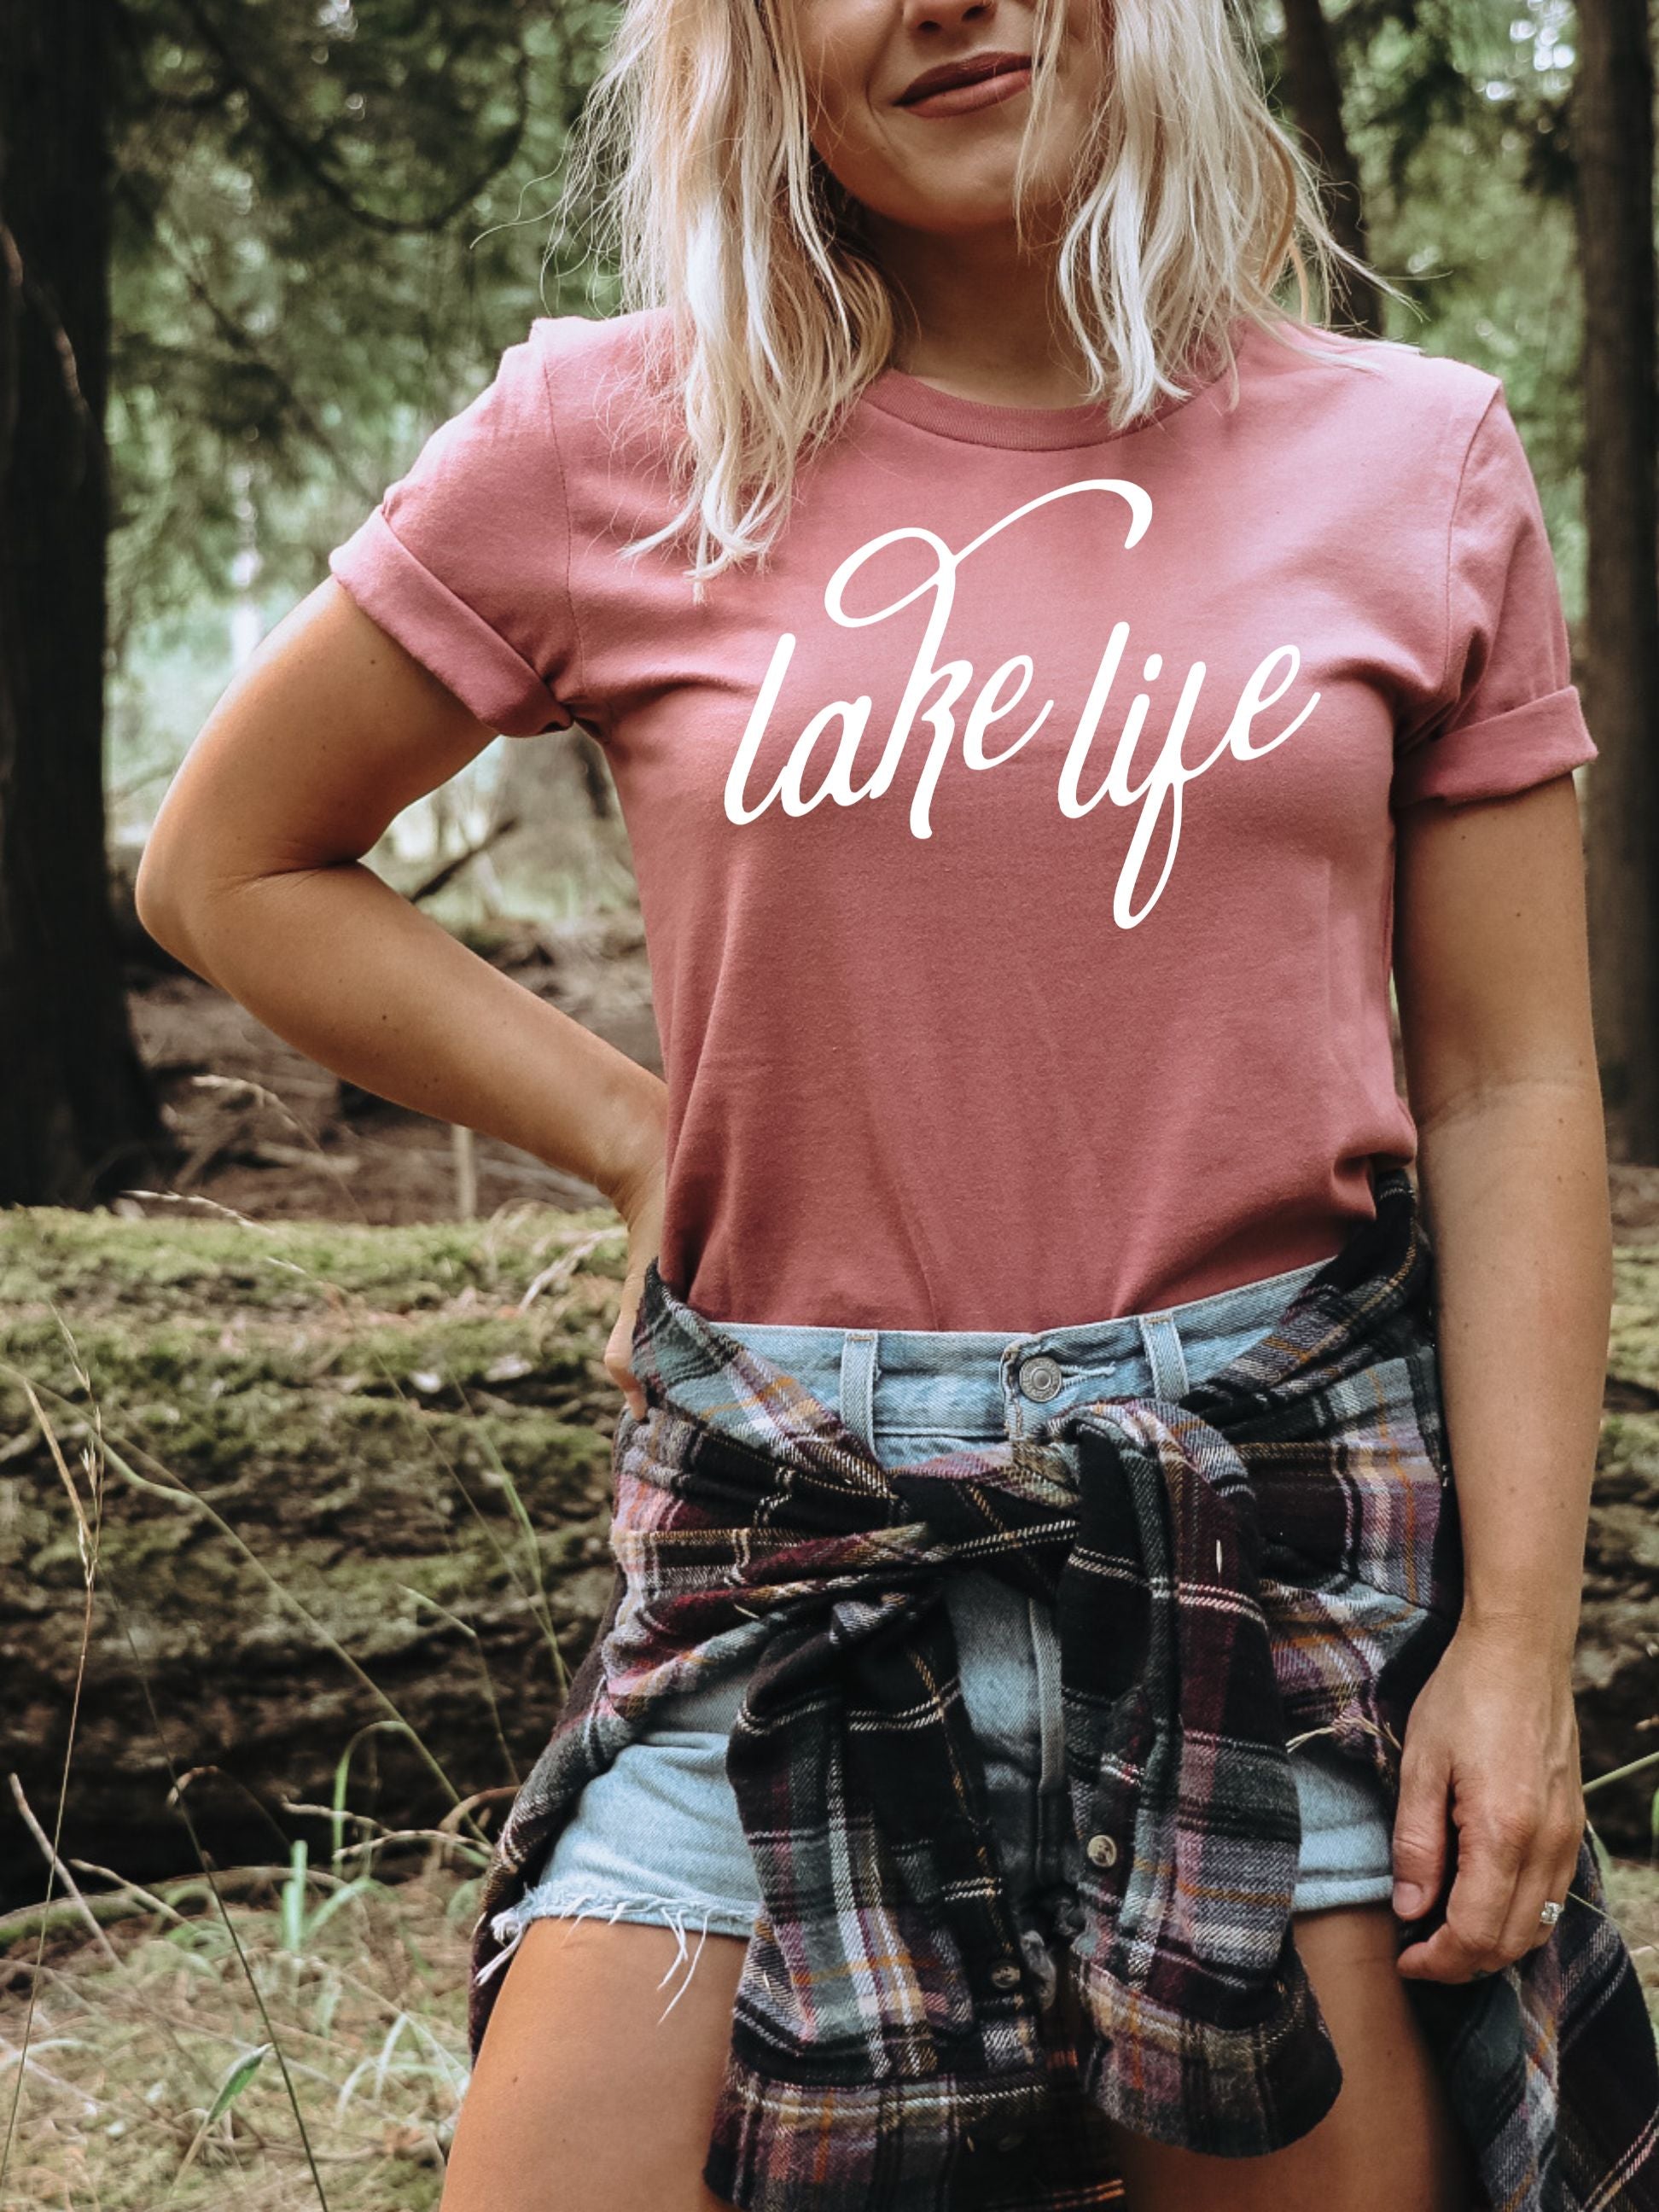 Lake Life Tshirt for cabin weekends or girls trips